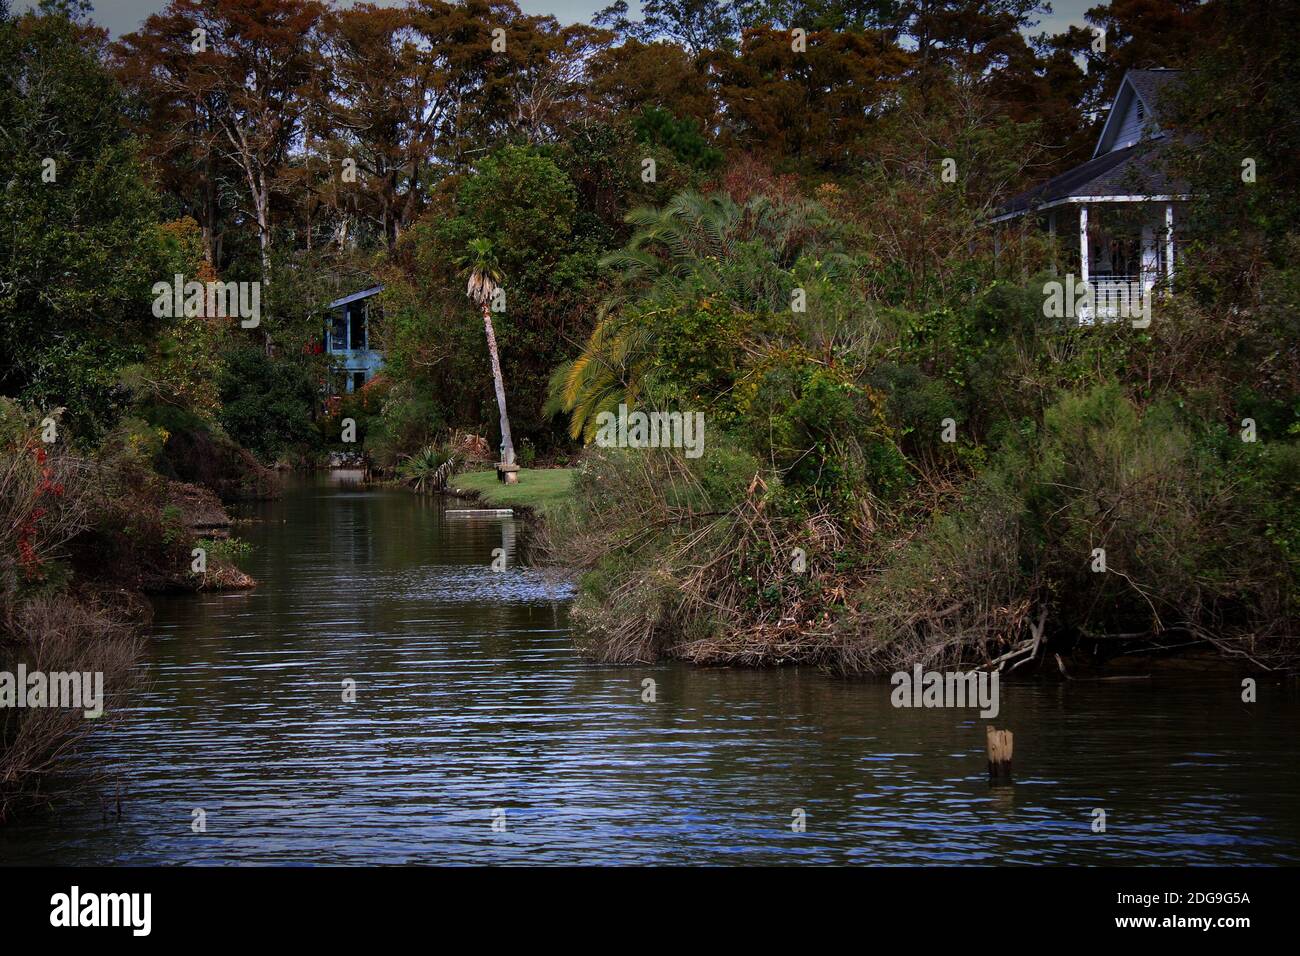 lush greenery conceals cottages along the banks of this quiet canal Stock Photo